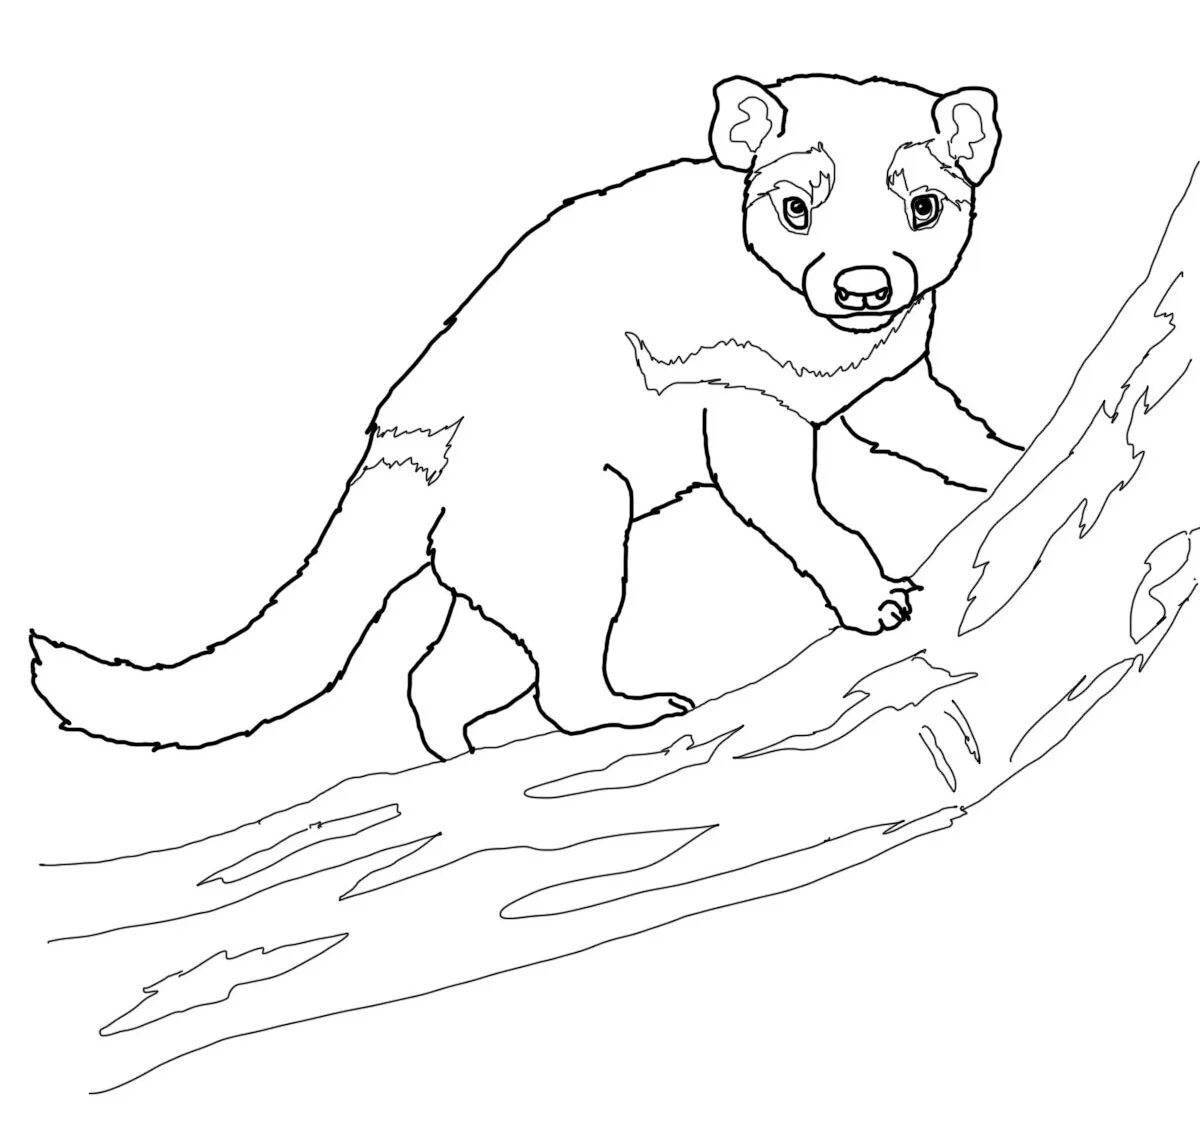 Glorious marsupial wolf coloring page